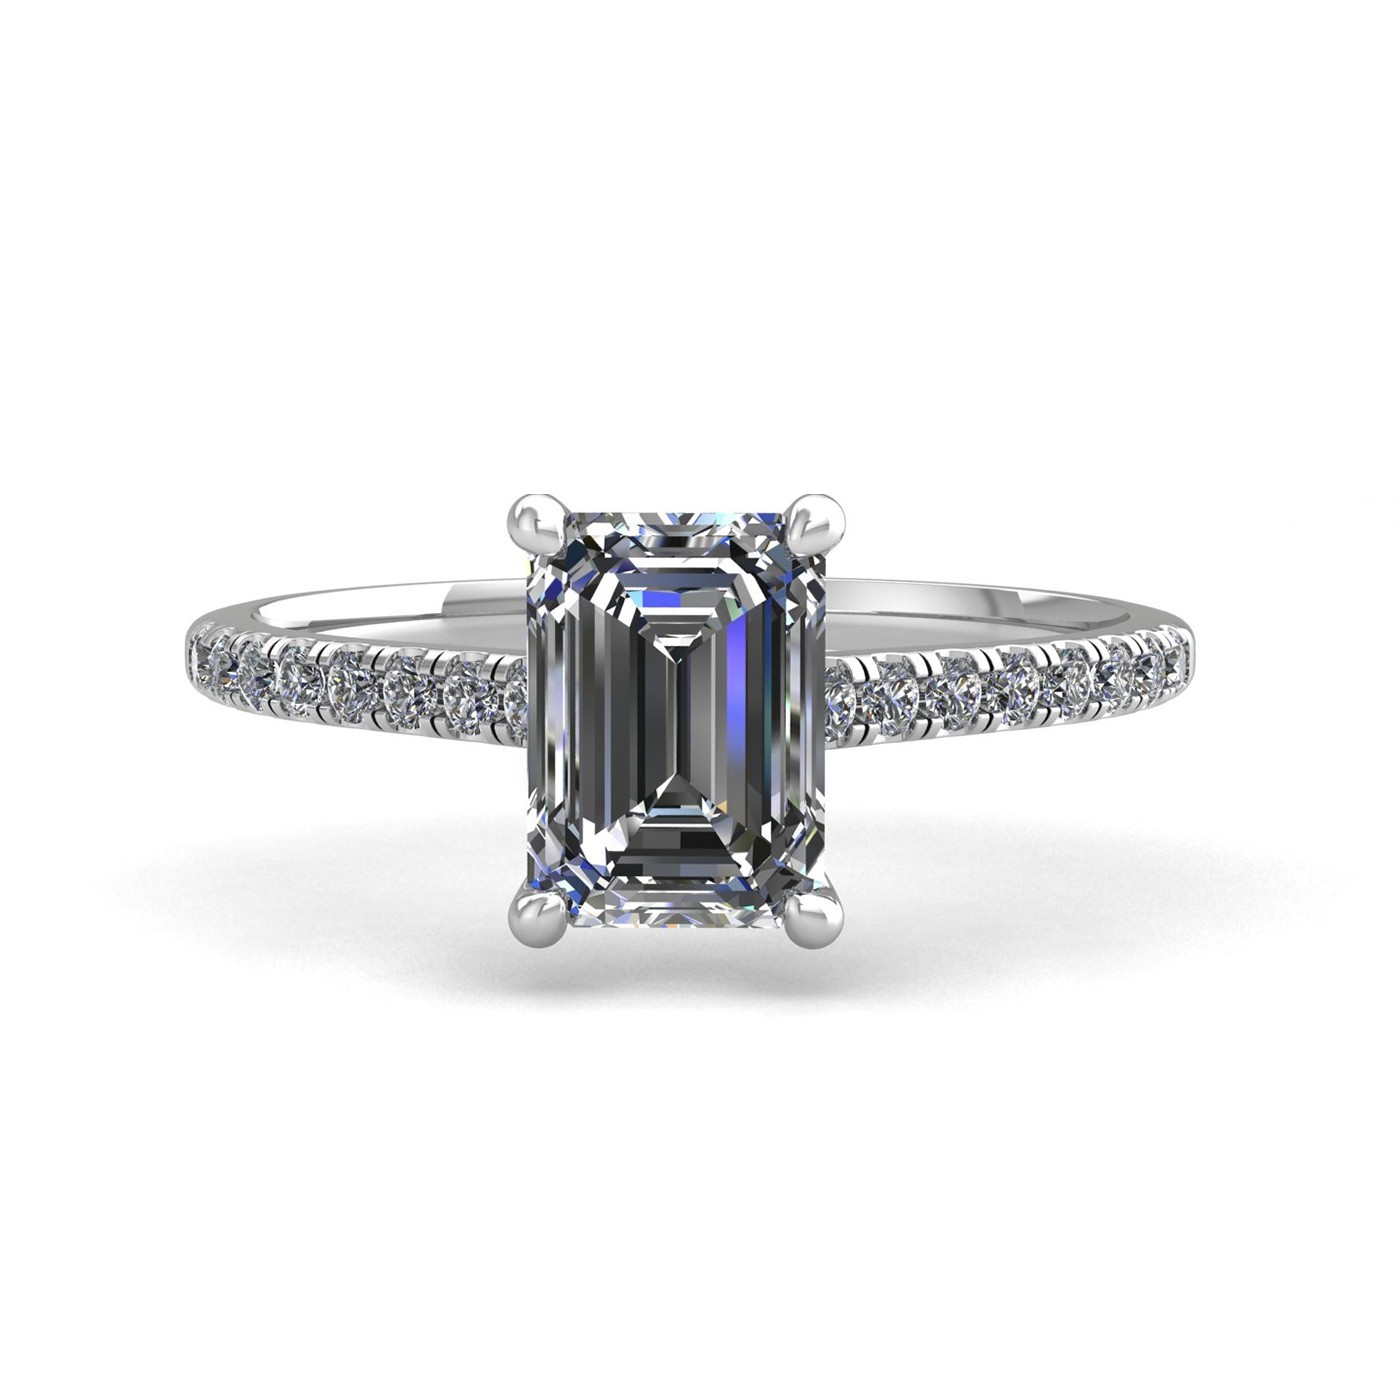 18k white gold 1.20ct 4 prongs emerald cut diamond engagement ring with whisper thin pavÉ set band Photos & images